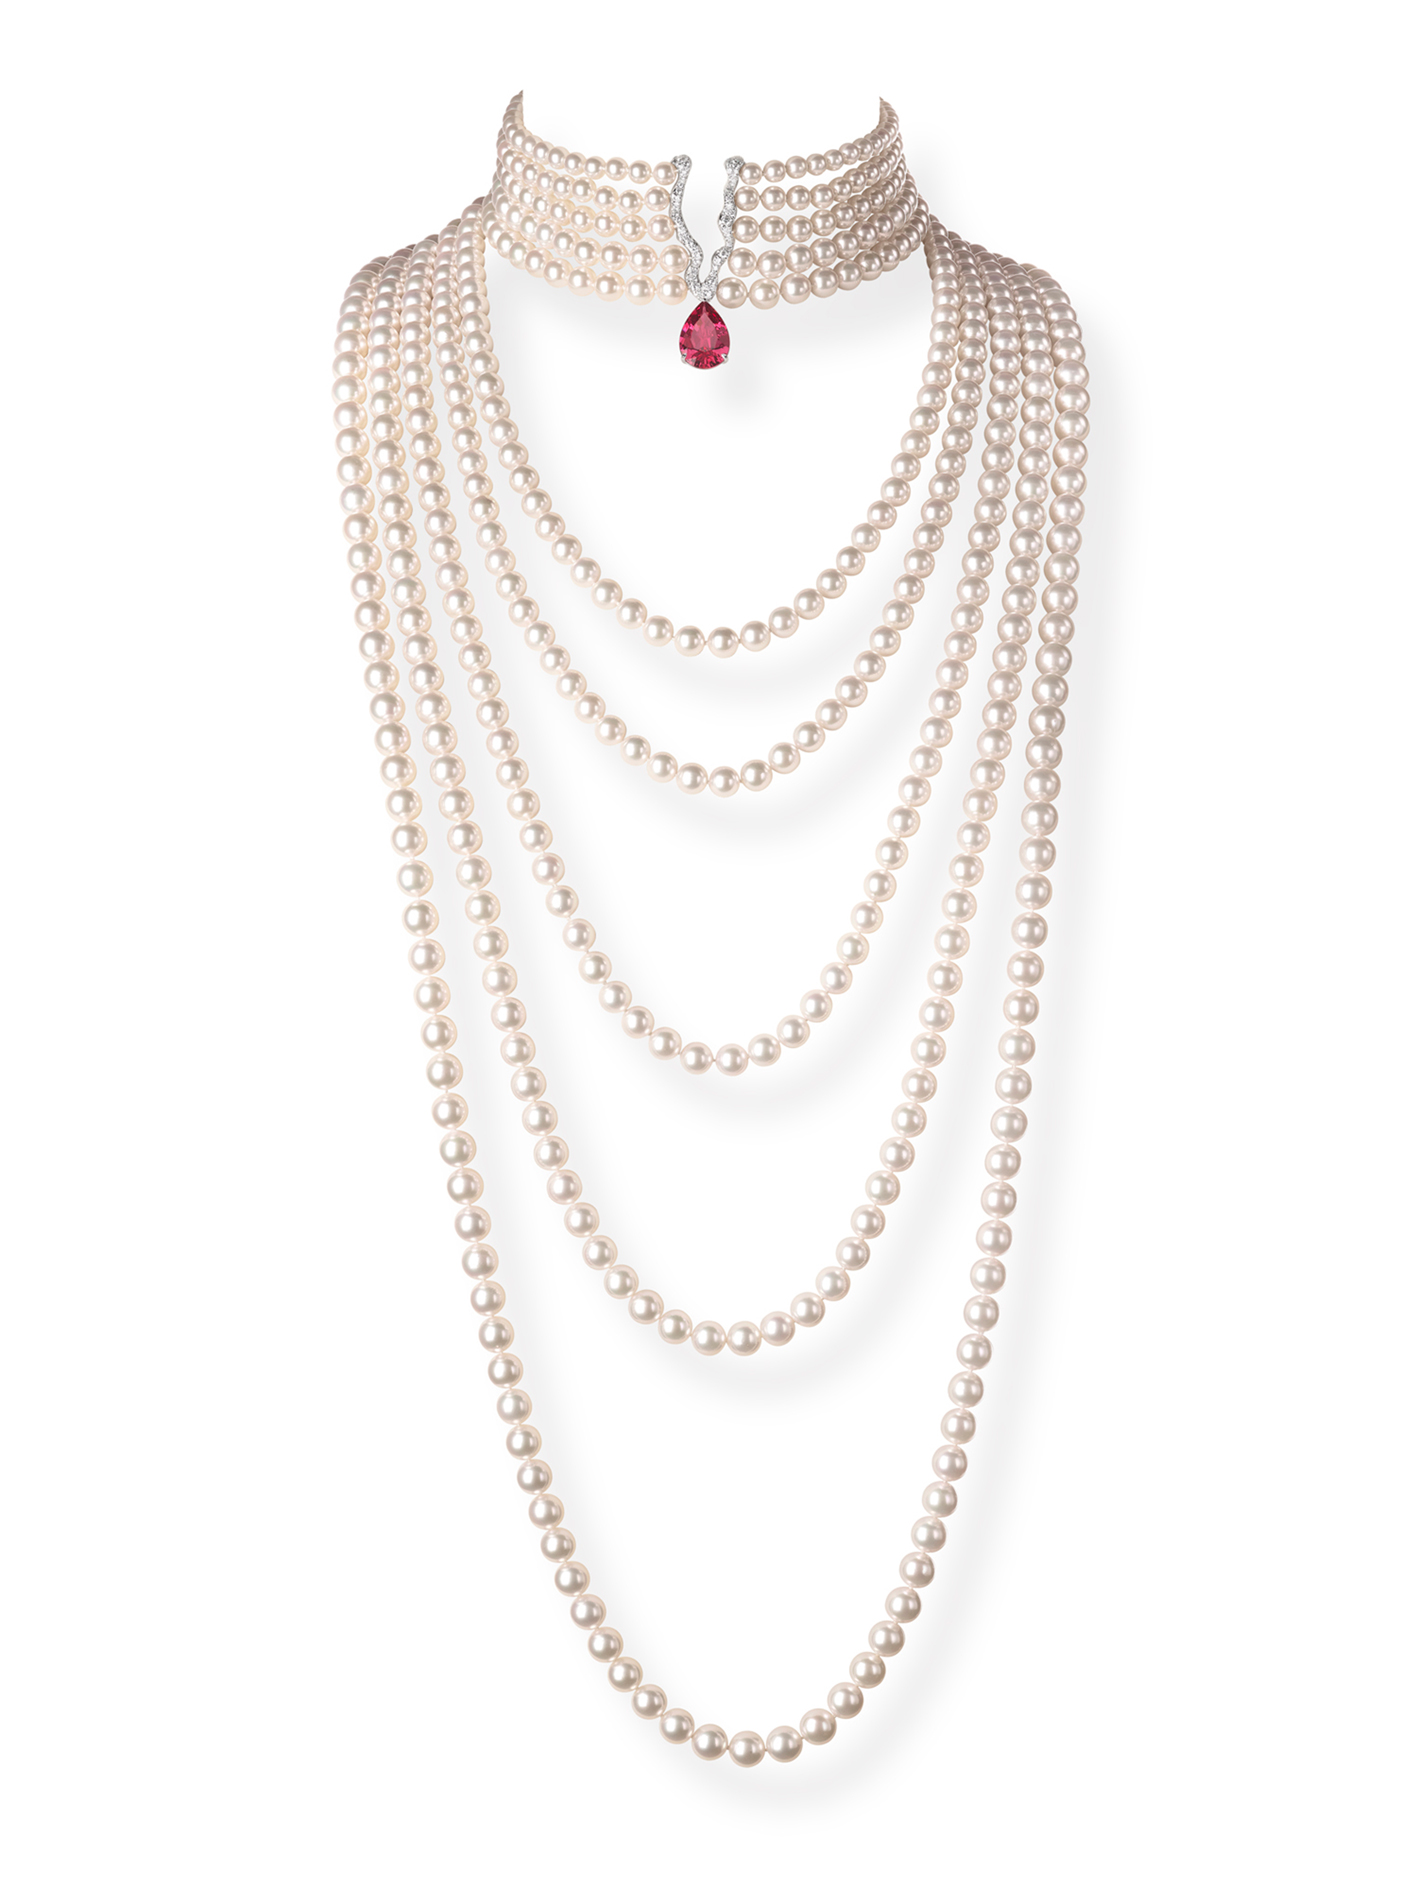 AKOYA PEARL NECKLACE SET WITH DIAMONDS AND A 13-CARAT PEAR-SHAPED RED SPINEL BY CHOPARD